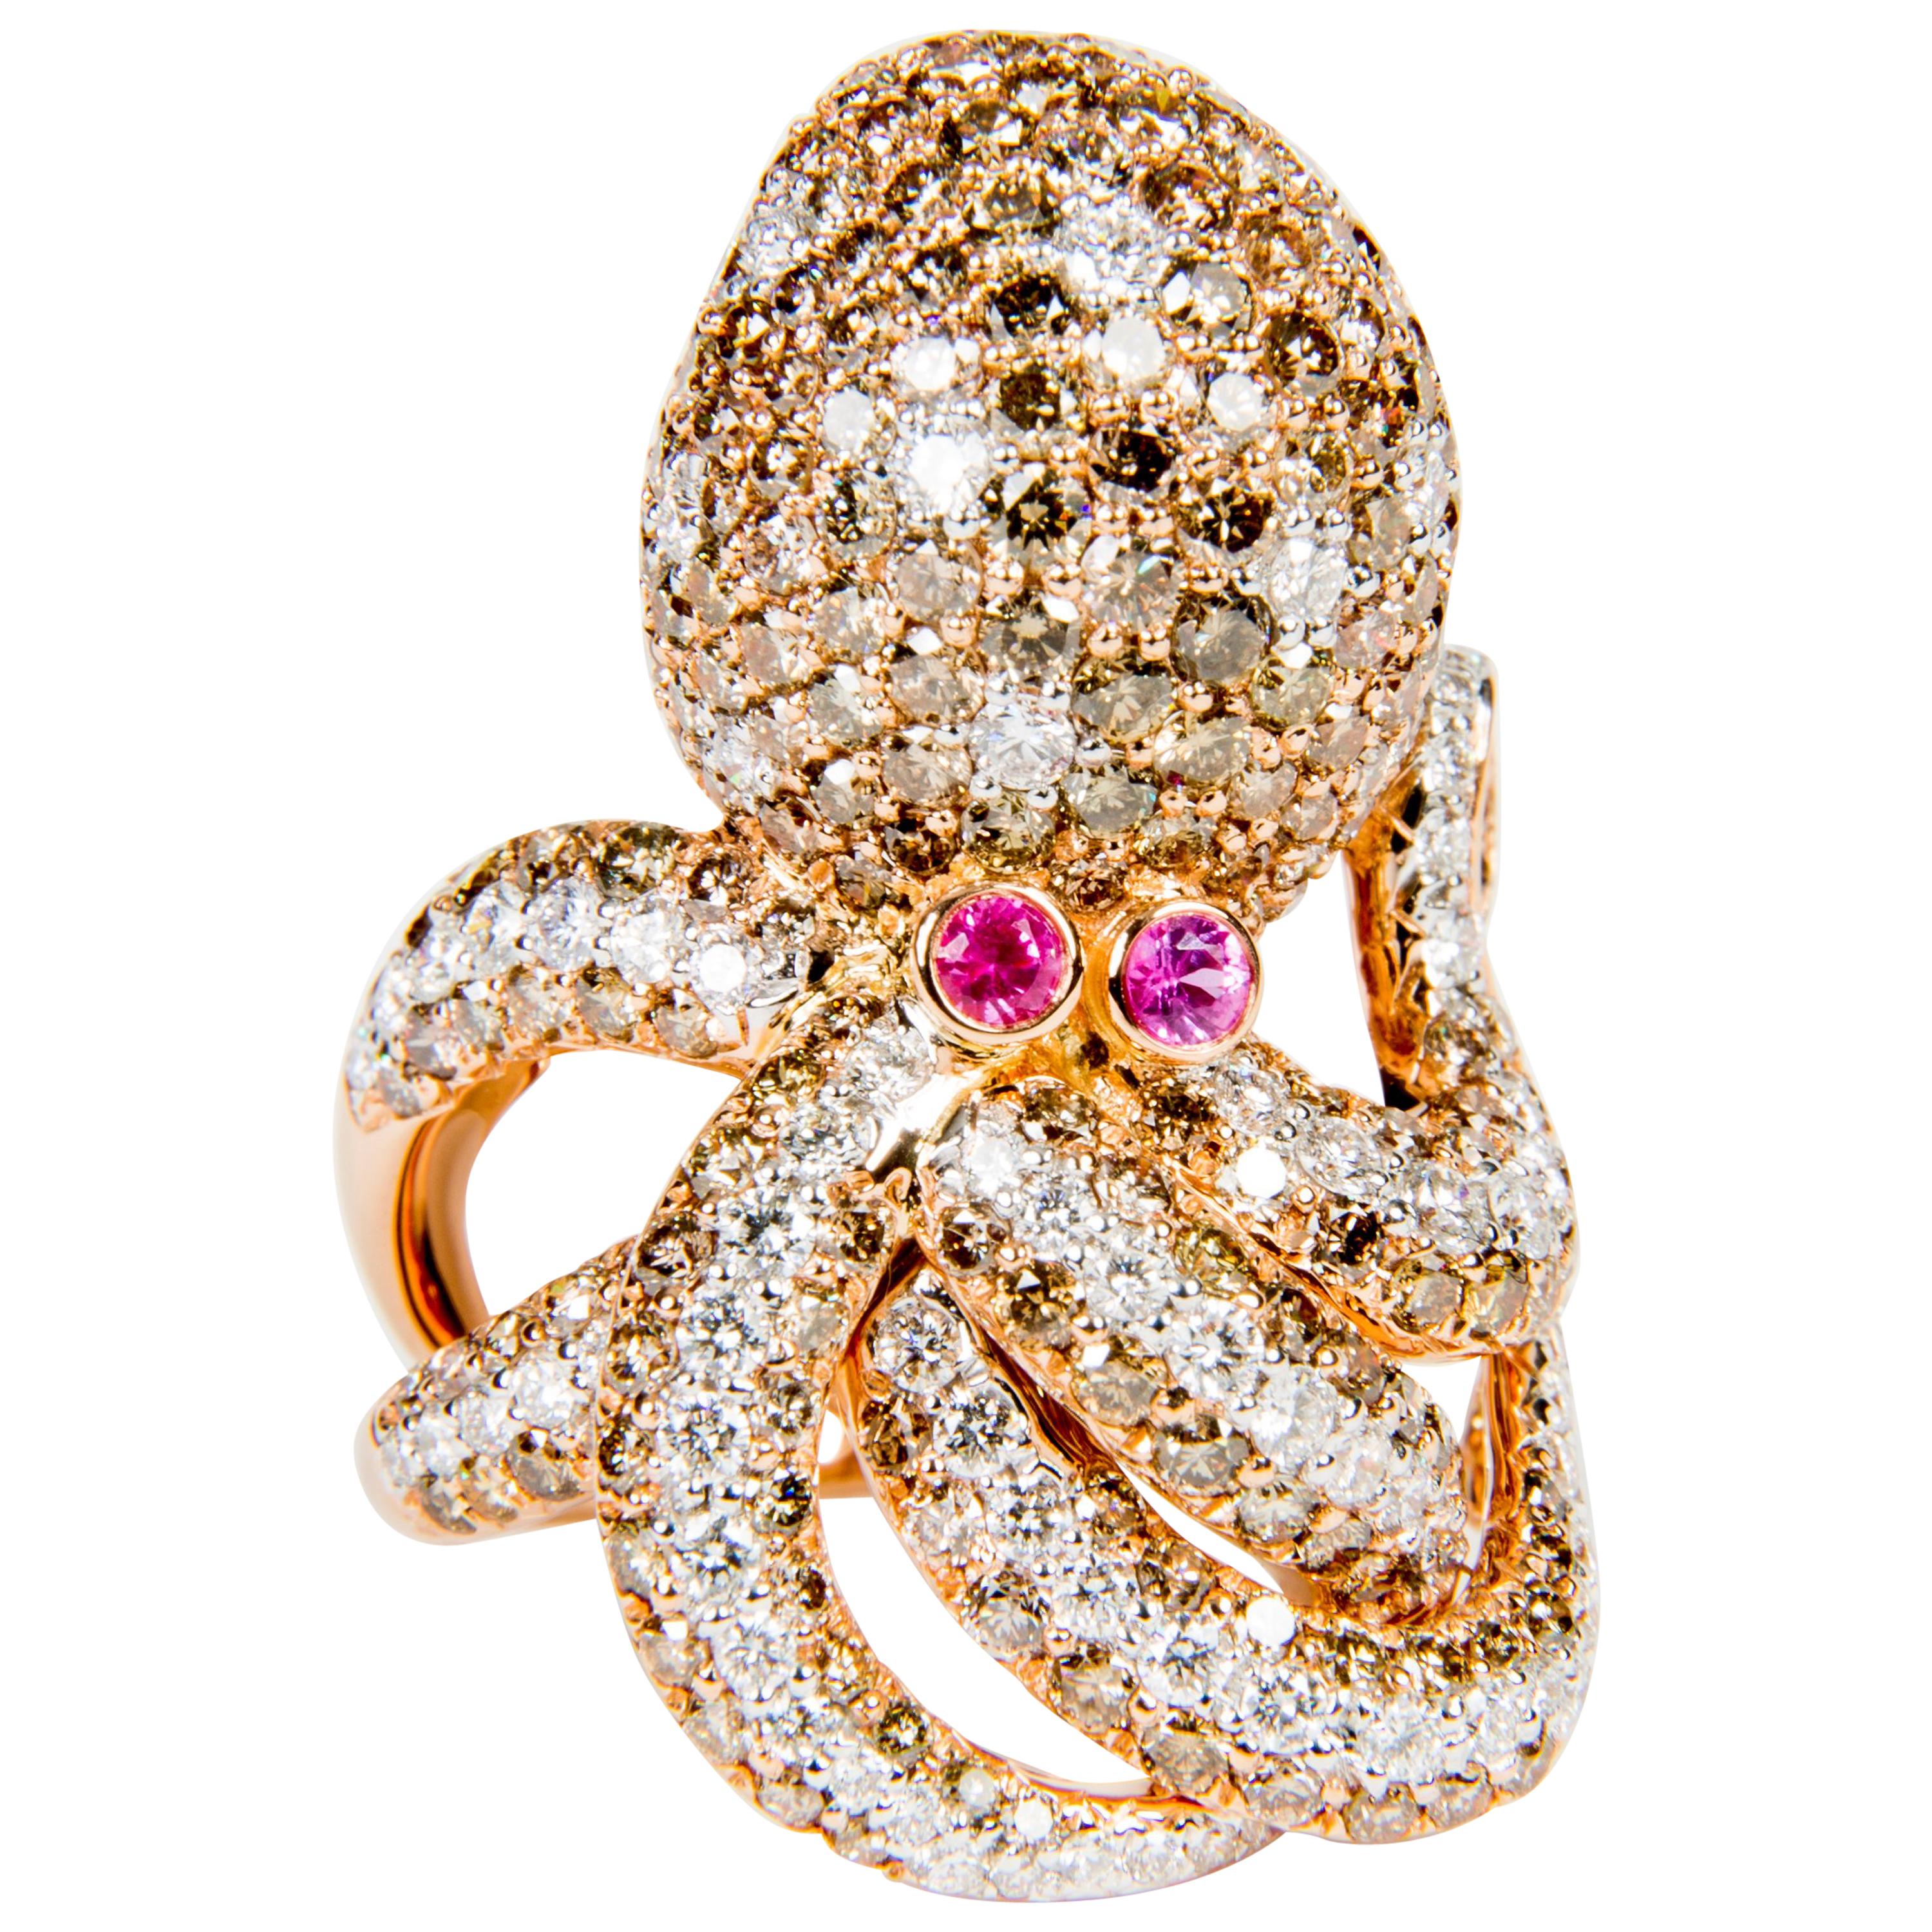 5.55ct Diamond and Pink Sapphire Octopus Shaped Cocktail Ring in 18K Rose Gold